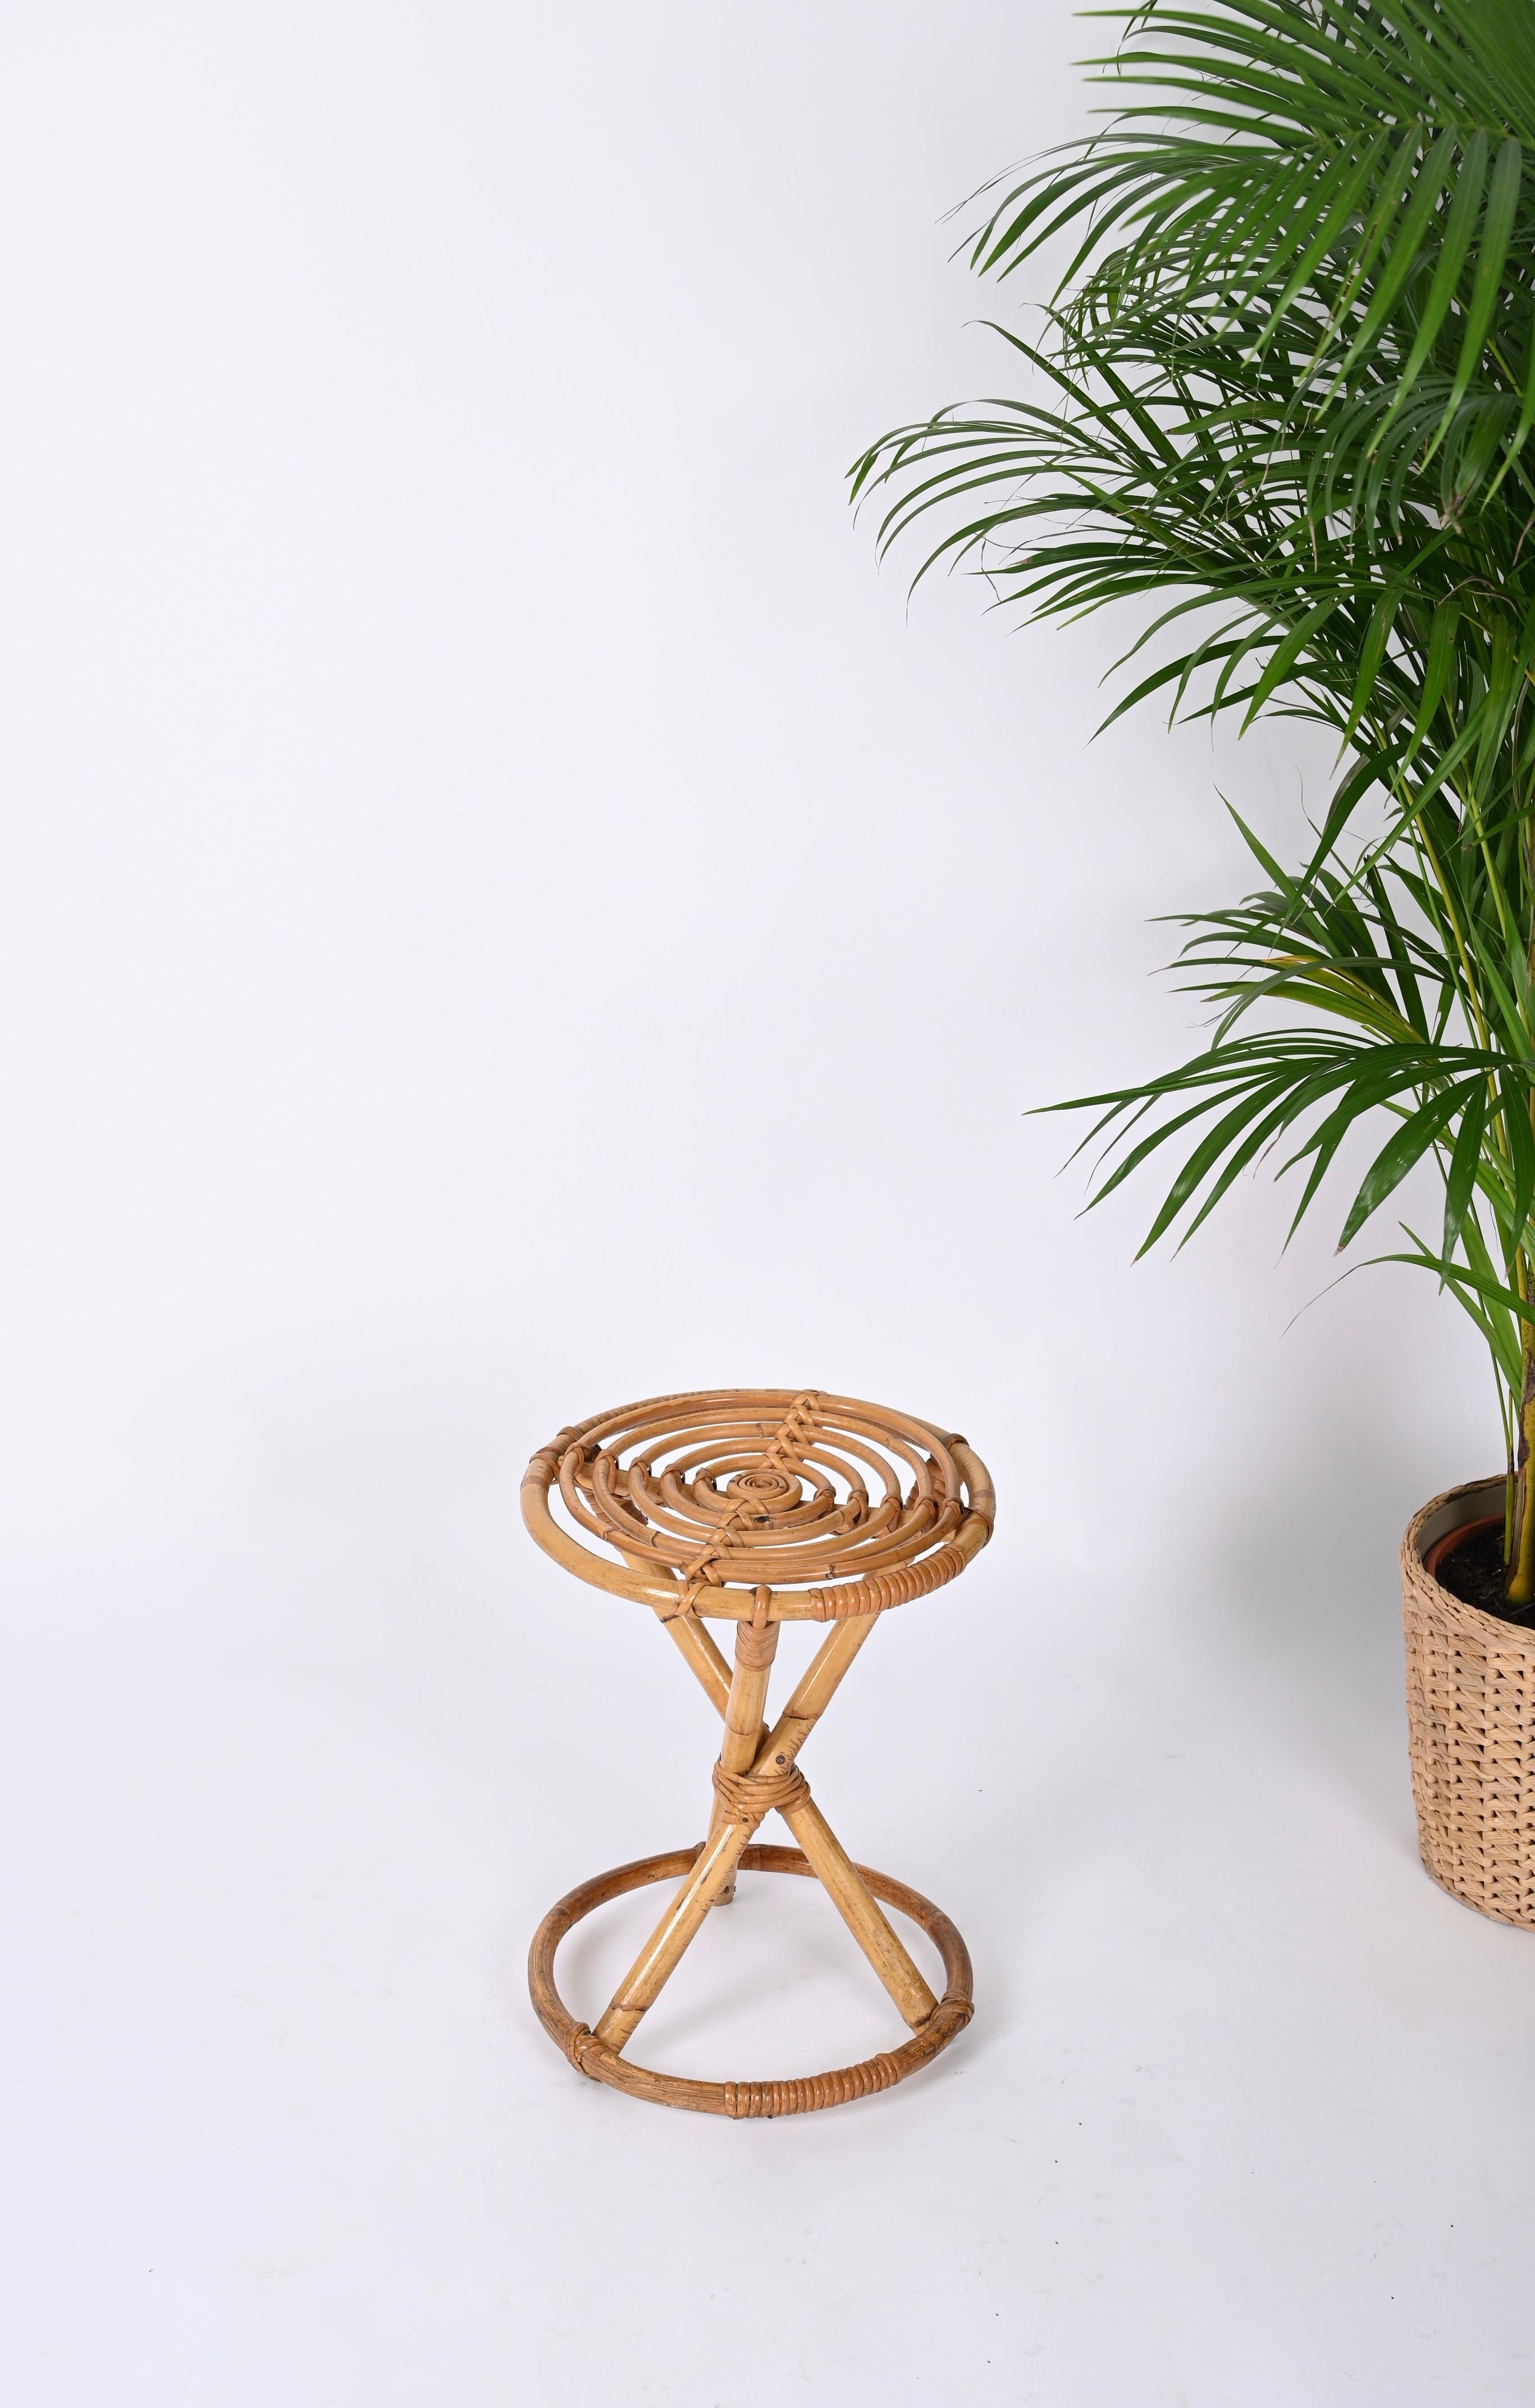 Lovely Mid-Century rattan and bamboo round stool. This amazing piece was produced in Italy during 1960s.

The stool features a round base in curved bamboo, three straight legs and a gorgeous round seat decorated inside by spiral-shaped bamboo kept